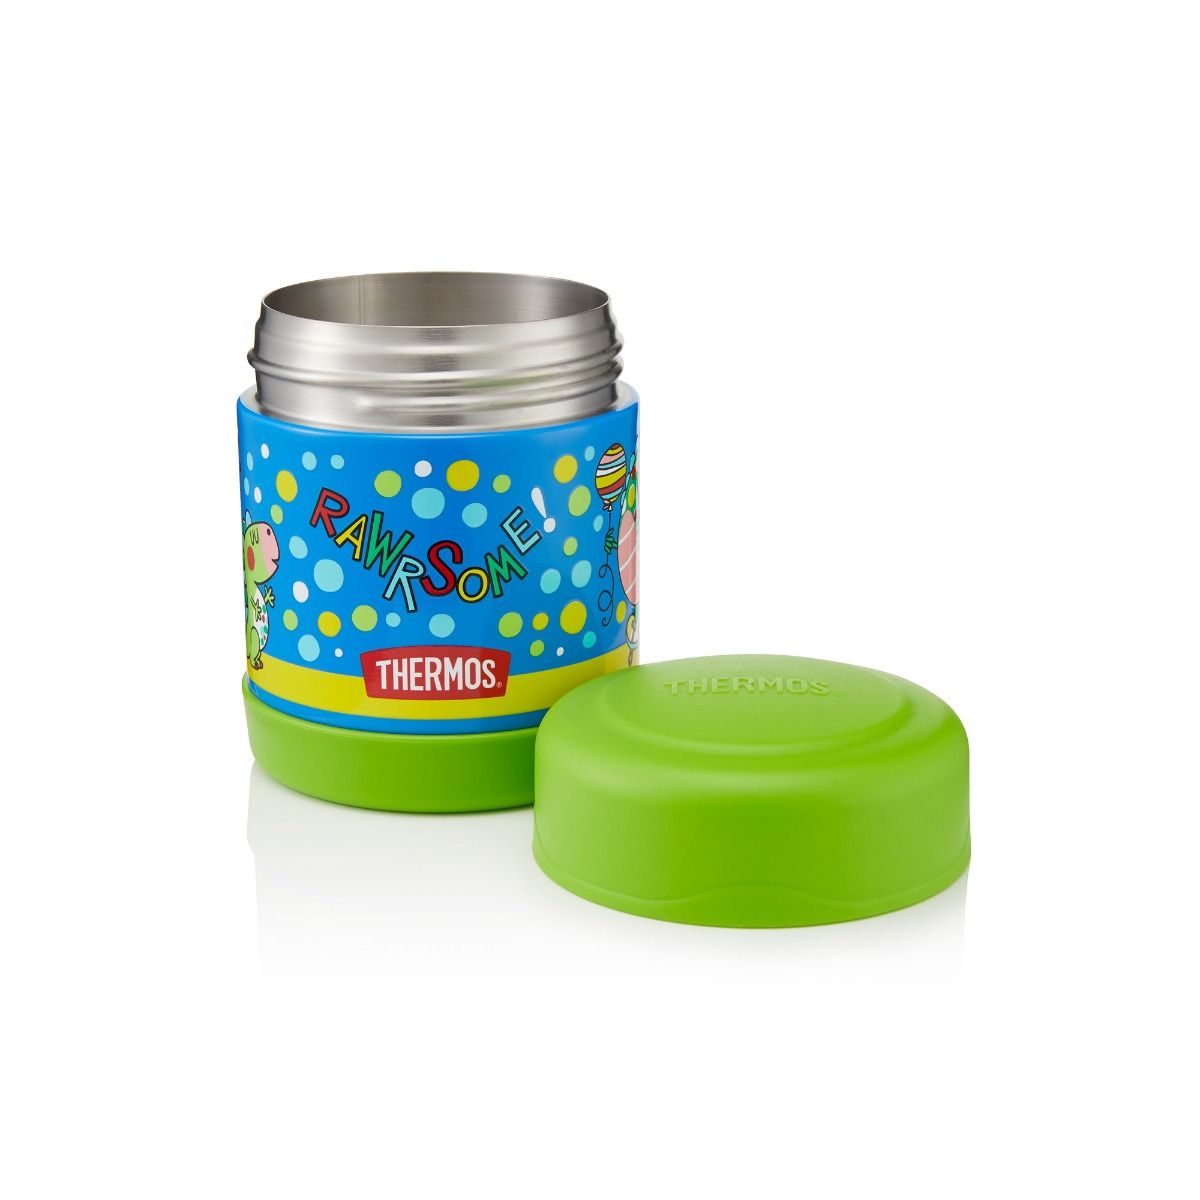 https://thermos.co.uk/media/catalog/product/cache/61e1721dbc72303a19da46e2aa21539b/d/i/dinosaur-290ml-gtb-rachel-ellen-funtainer-food-flask-200122-open.jpg